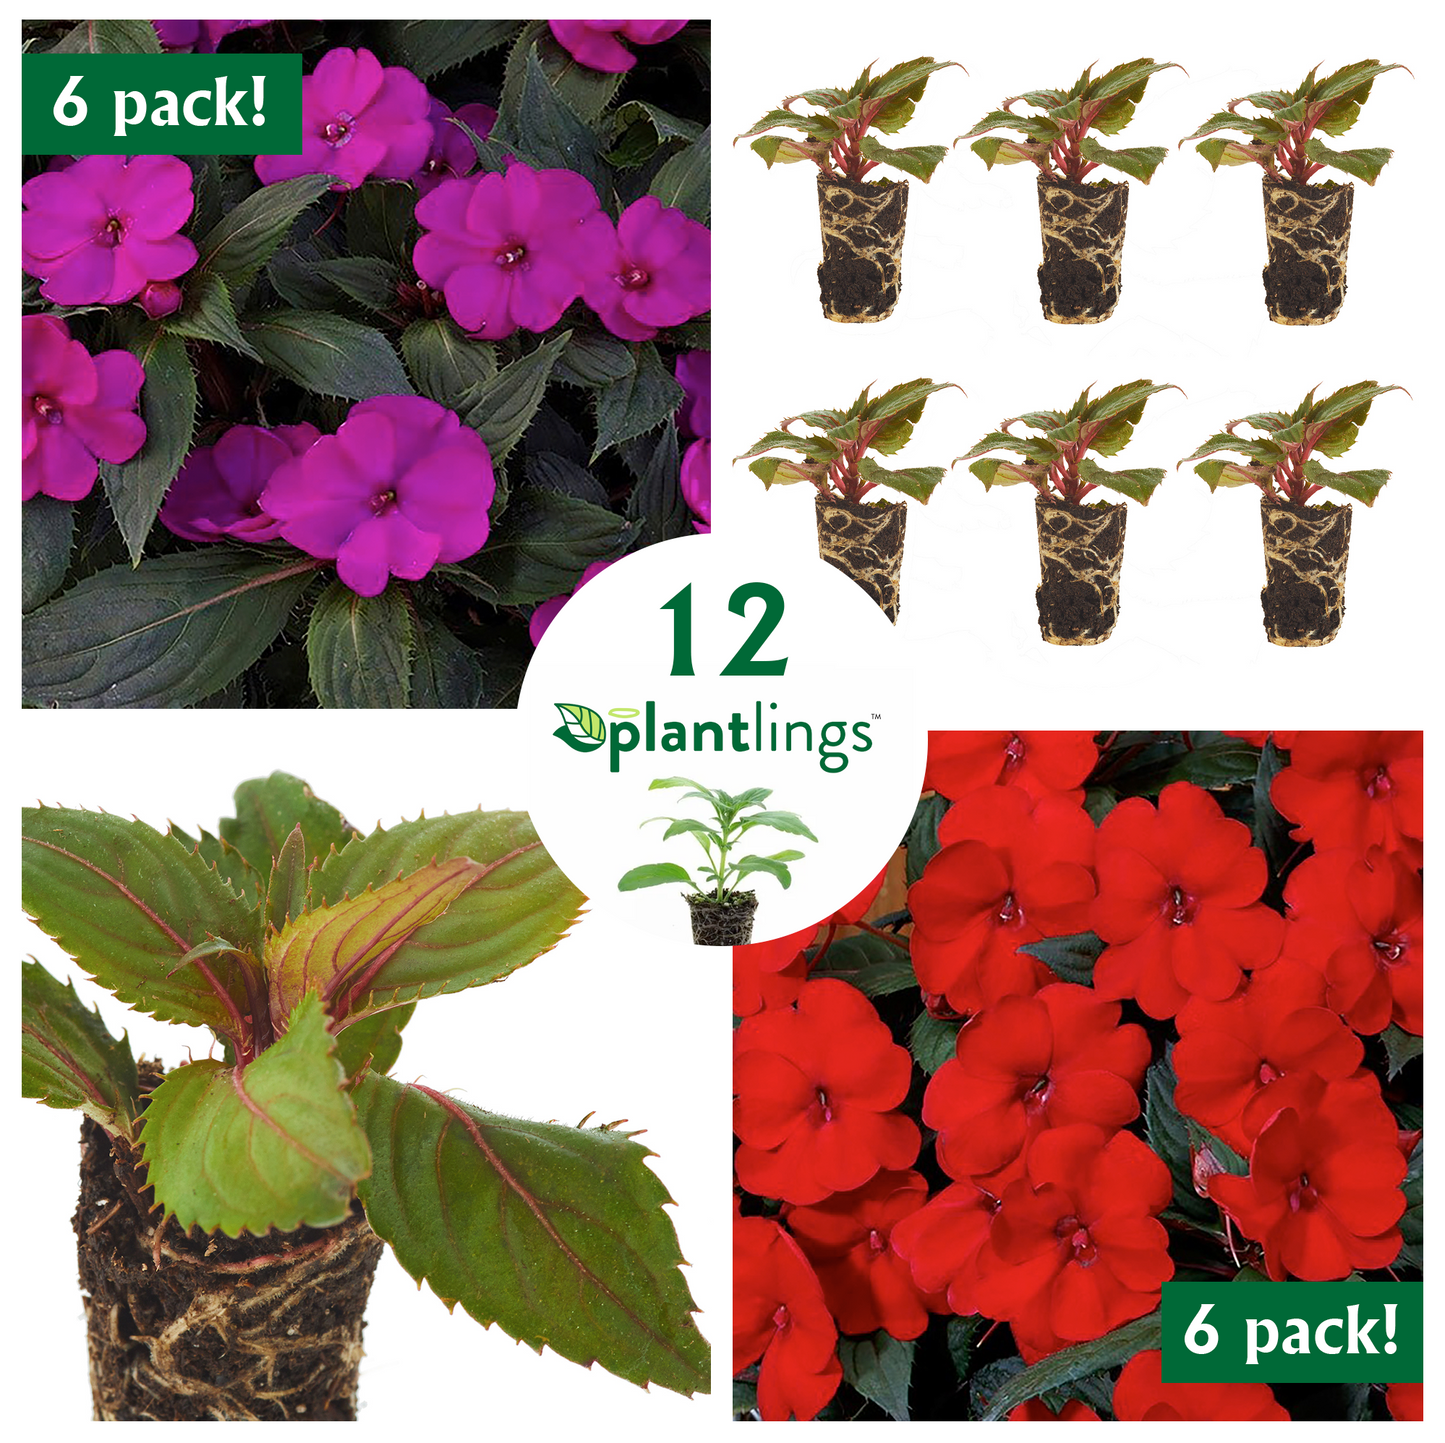 Flower Border Kit with Impatiens Exotic Sunpatiens Compact Deep Red & Purple Plantlings Live Baby Plants 1-3in., 12-Pack